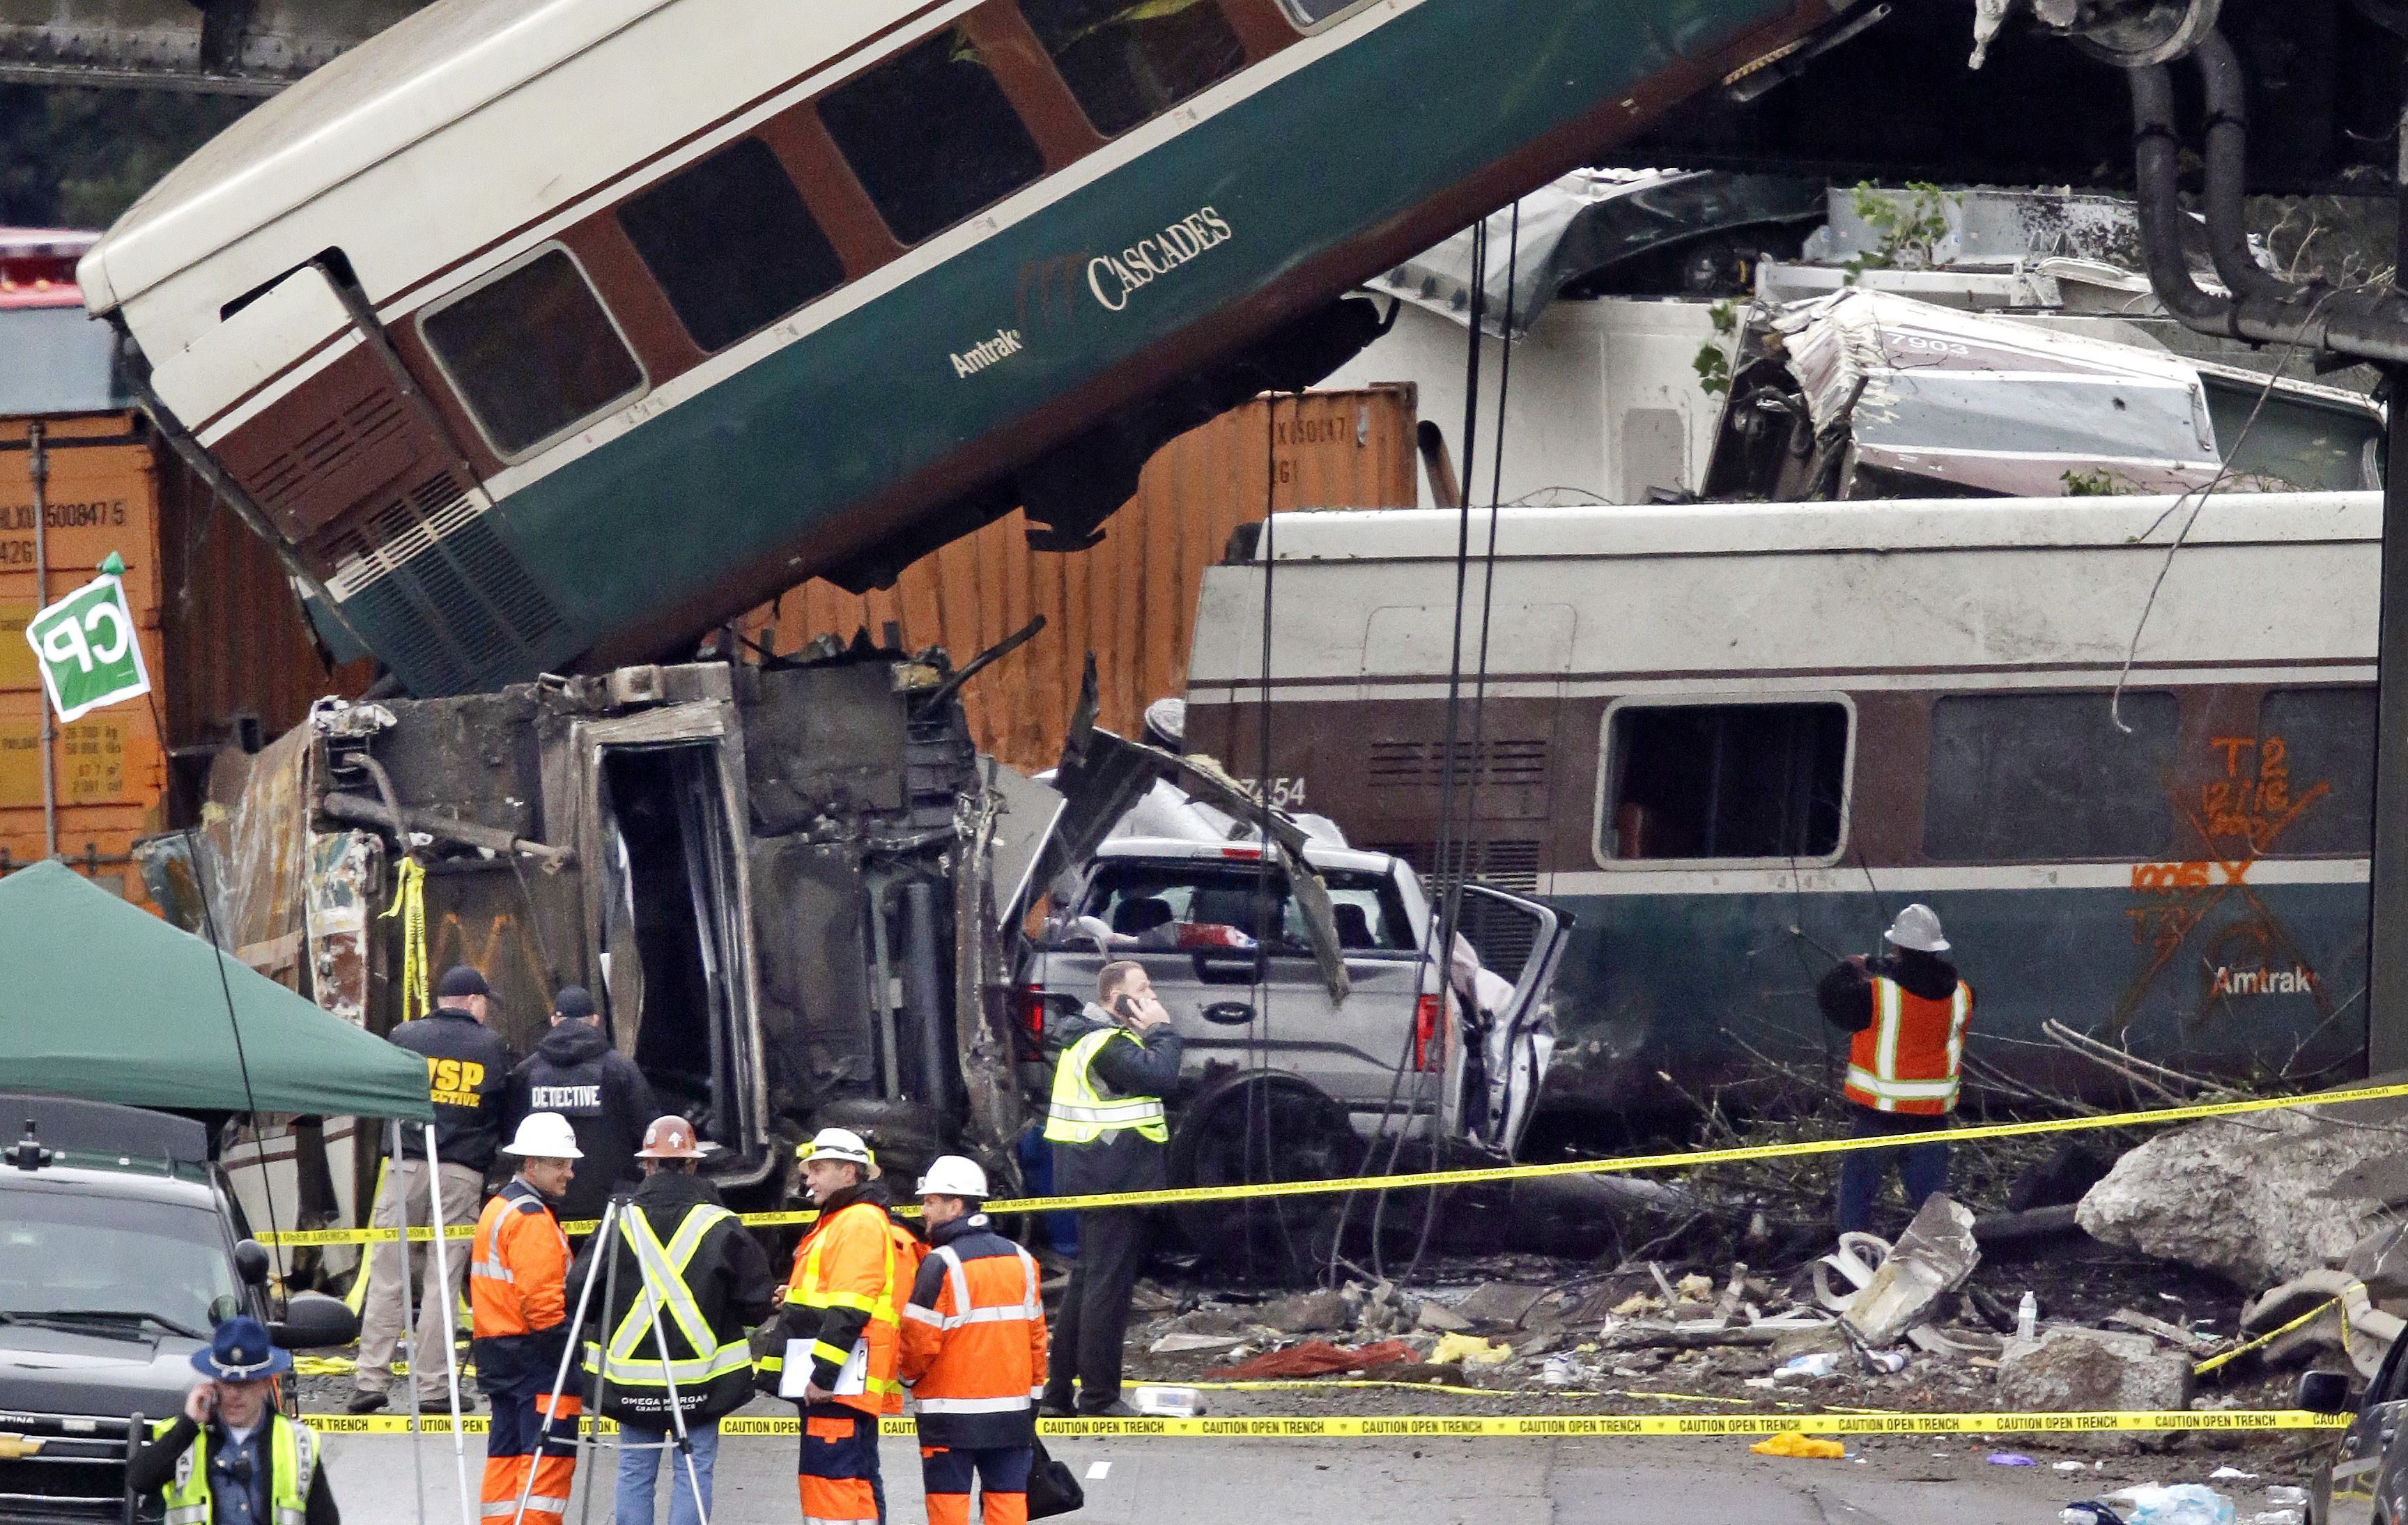 Cars from an Amtrak train that derailed above lay spilled onto Interstate 5 alongside smashed vehicles, in DuPont, Wash. The Amtrak train making the first-ever run along a faster new route hurtled off the overpass Monday near Tacoma and spilled some of its cars onto the highway below, killing some people, authorities said — Shutterstock/AP (Elaine Thompson/AP/REX/Shutterstock&mdash;Thompson/AP/REX/Shutterstock)